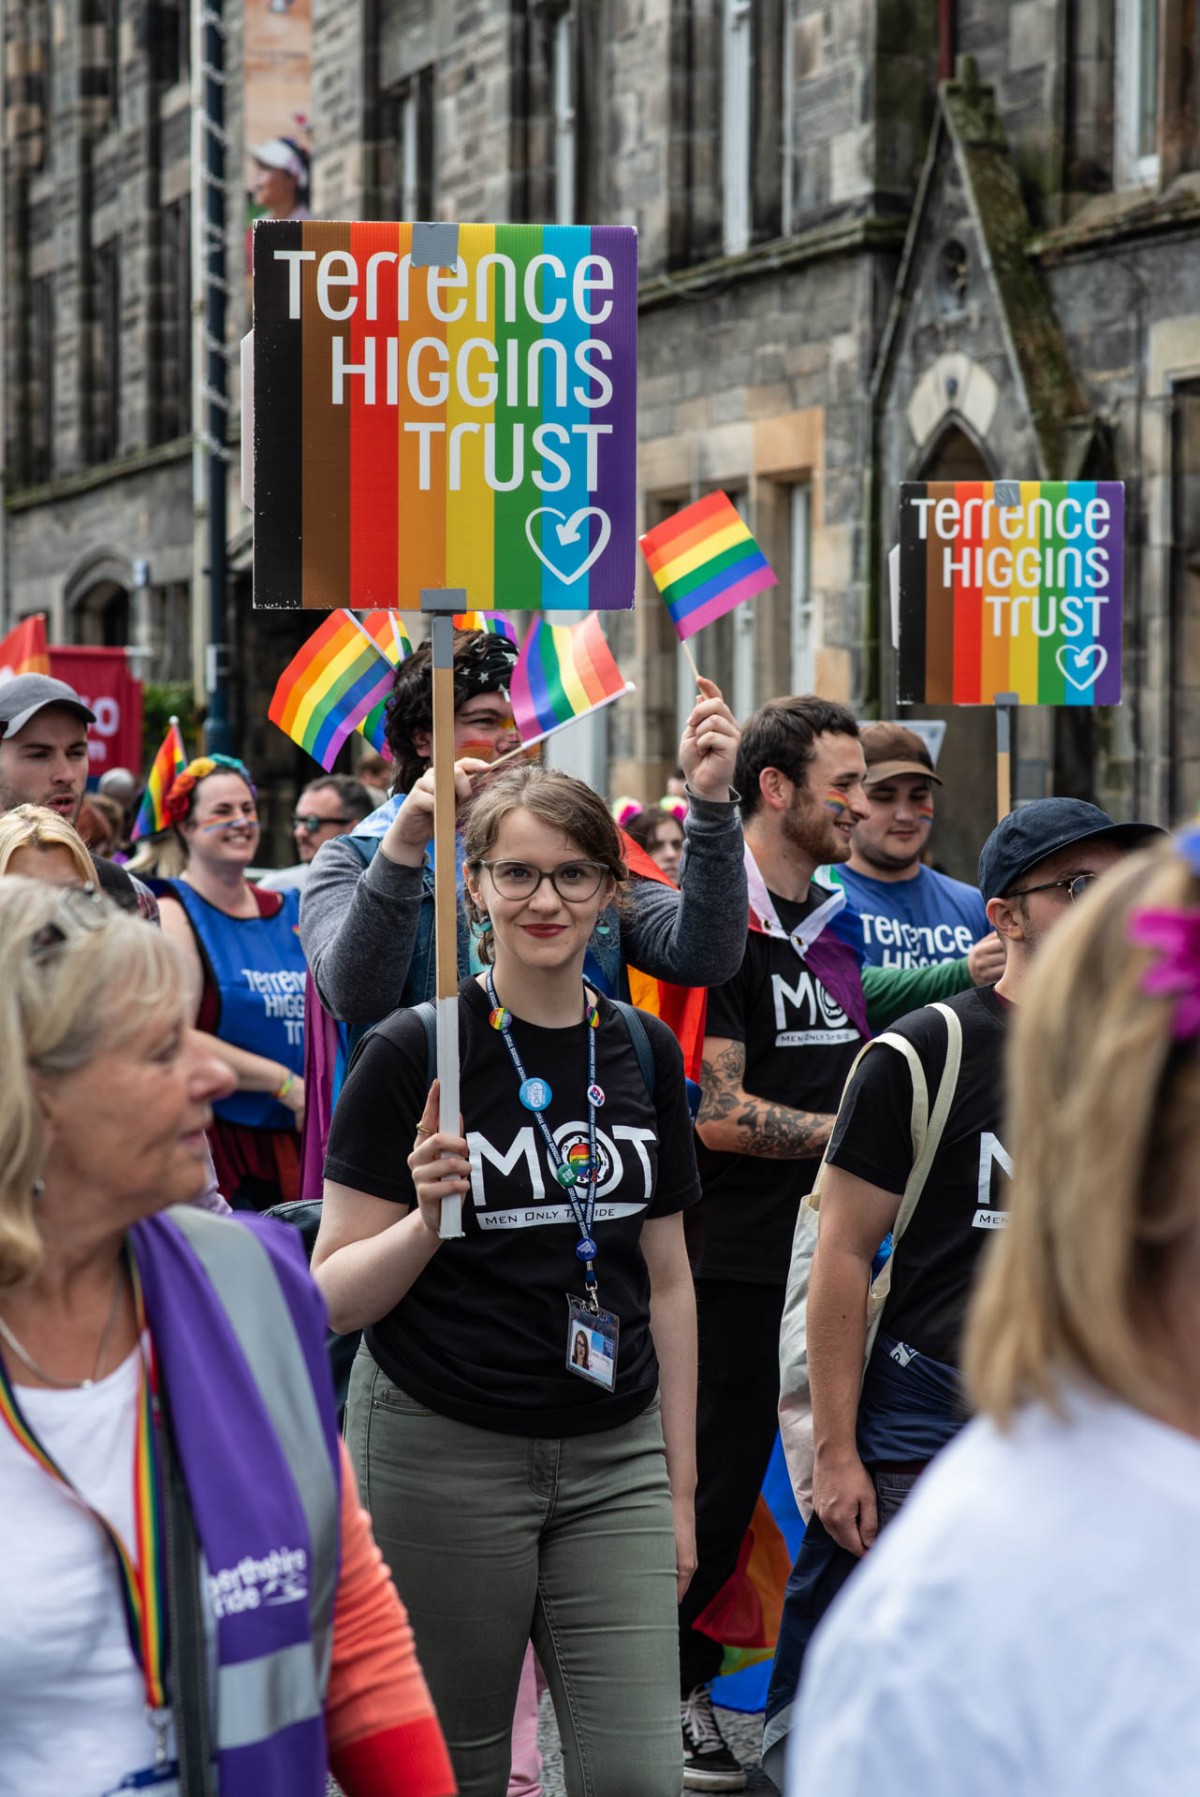 The Terrance Higgins Trust marched proudly in Perth City Centre.